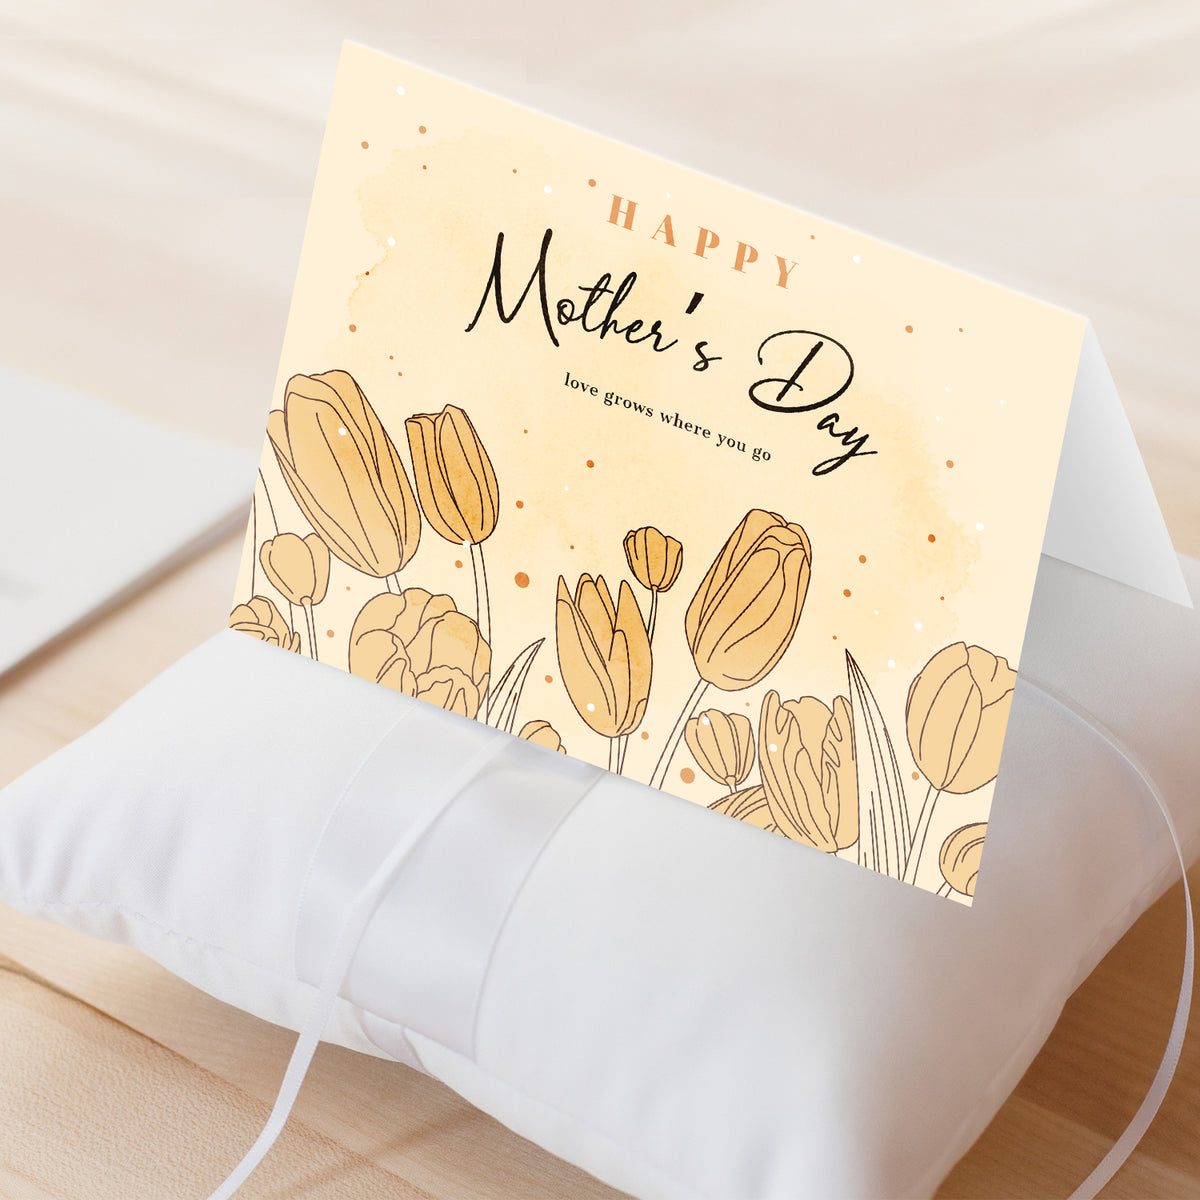 Happy Mother's Day, Love Grows Where You Go – Appreciation Thank You Greeting Cards and Envelopes for Mom, Wife | 4.25 x 5.5 | 10 per Pack